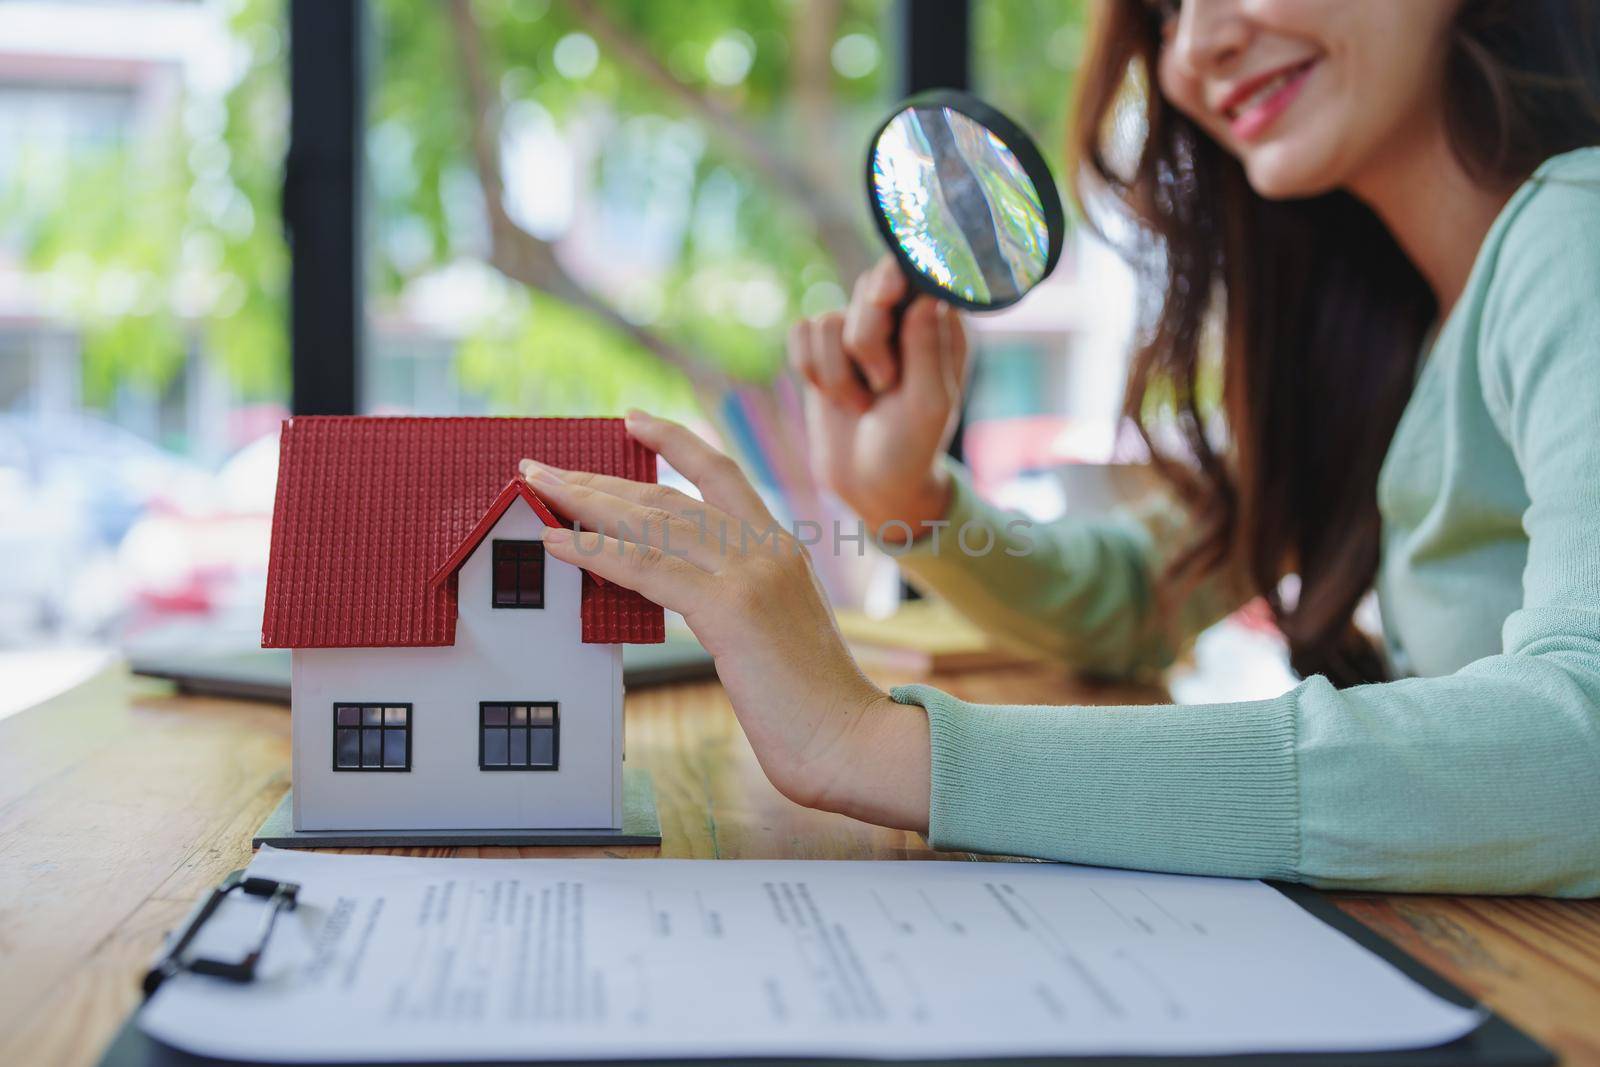 customer holding a magnifying glass to look at a house model inspection by Manastrong